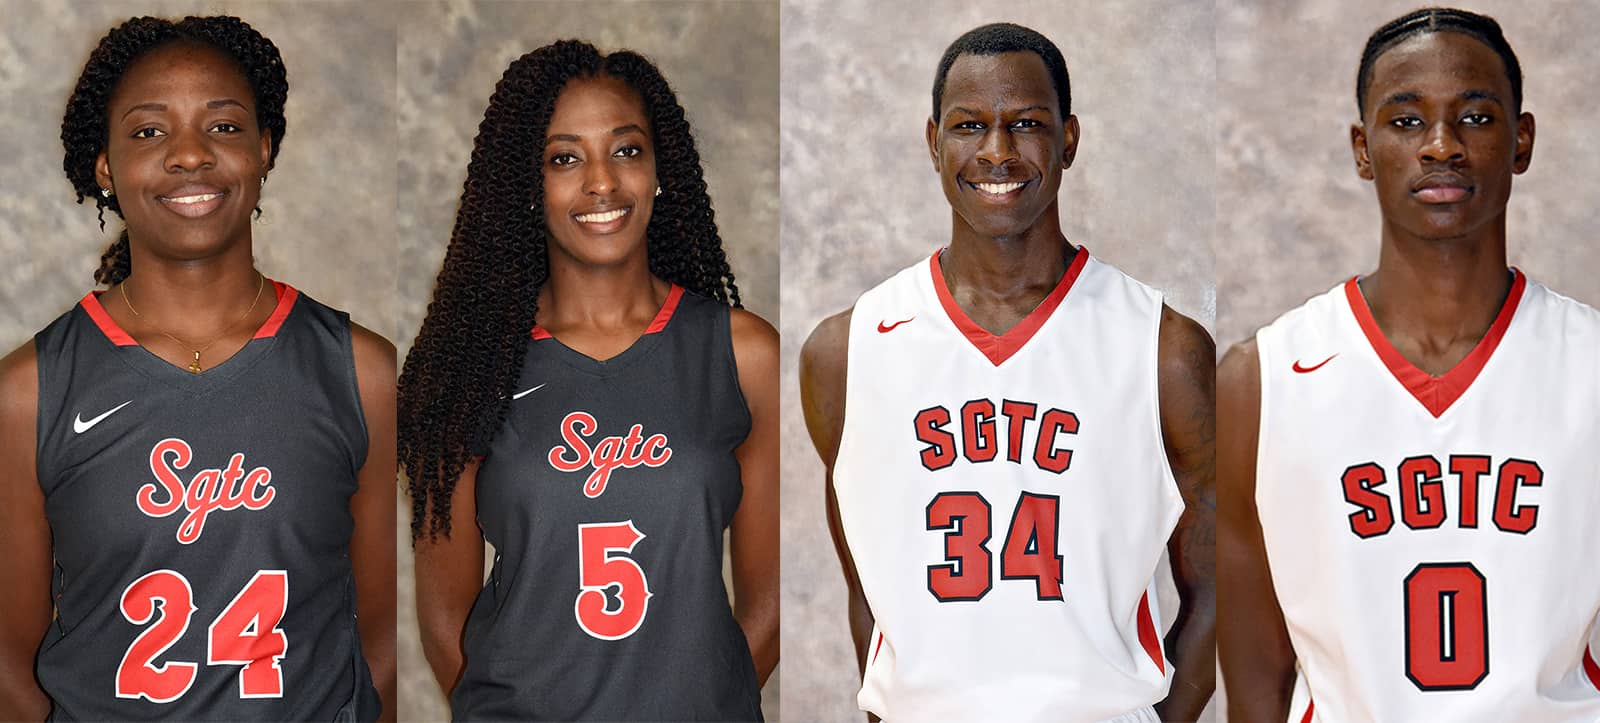 Four South Georgia Technical College Lady Jets and Jets were included in NJCAA individual rankings recently. Esther Adenike (24), Houlfat Mahouchiza (5) Marquel Wiggins (34) and DeVante Foster (0) were recognized for their talents on the court.